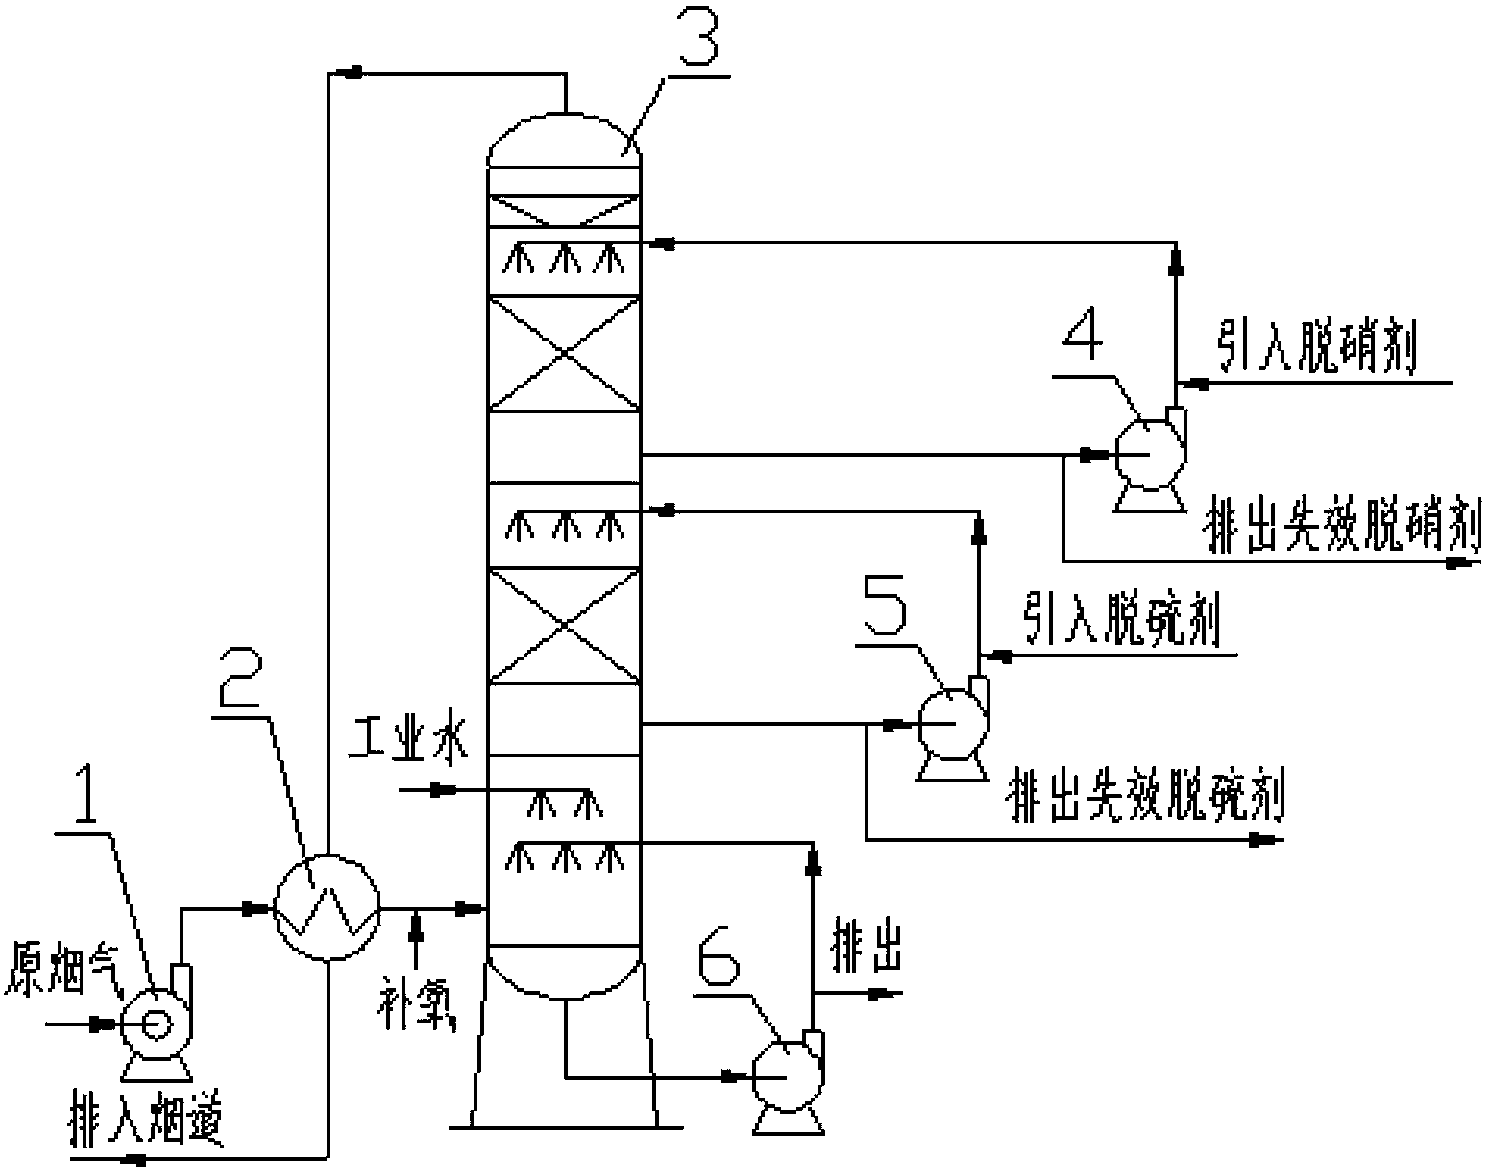 Wet-type smoke desulphurization and denitrification integrated system and method